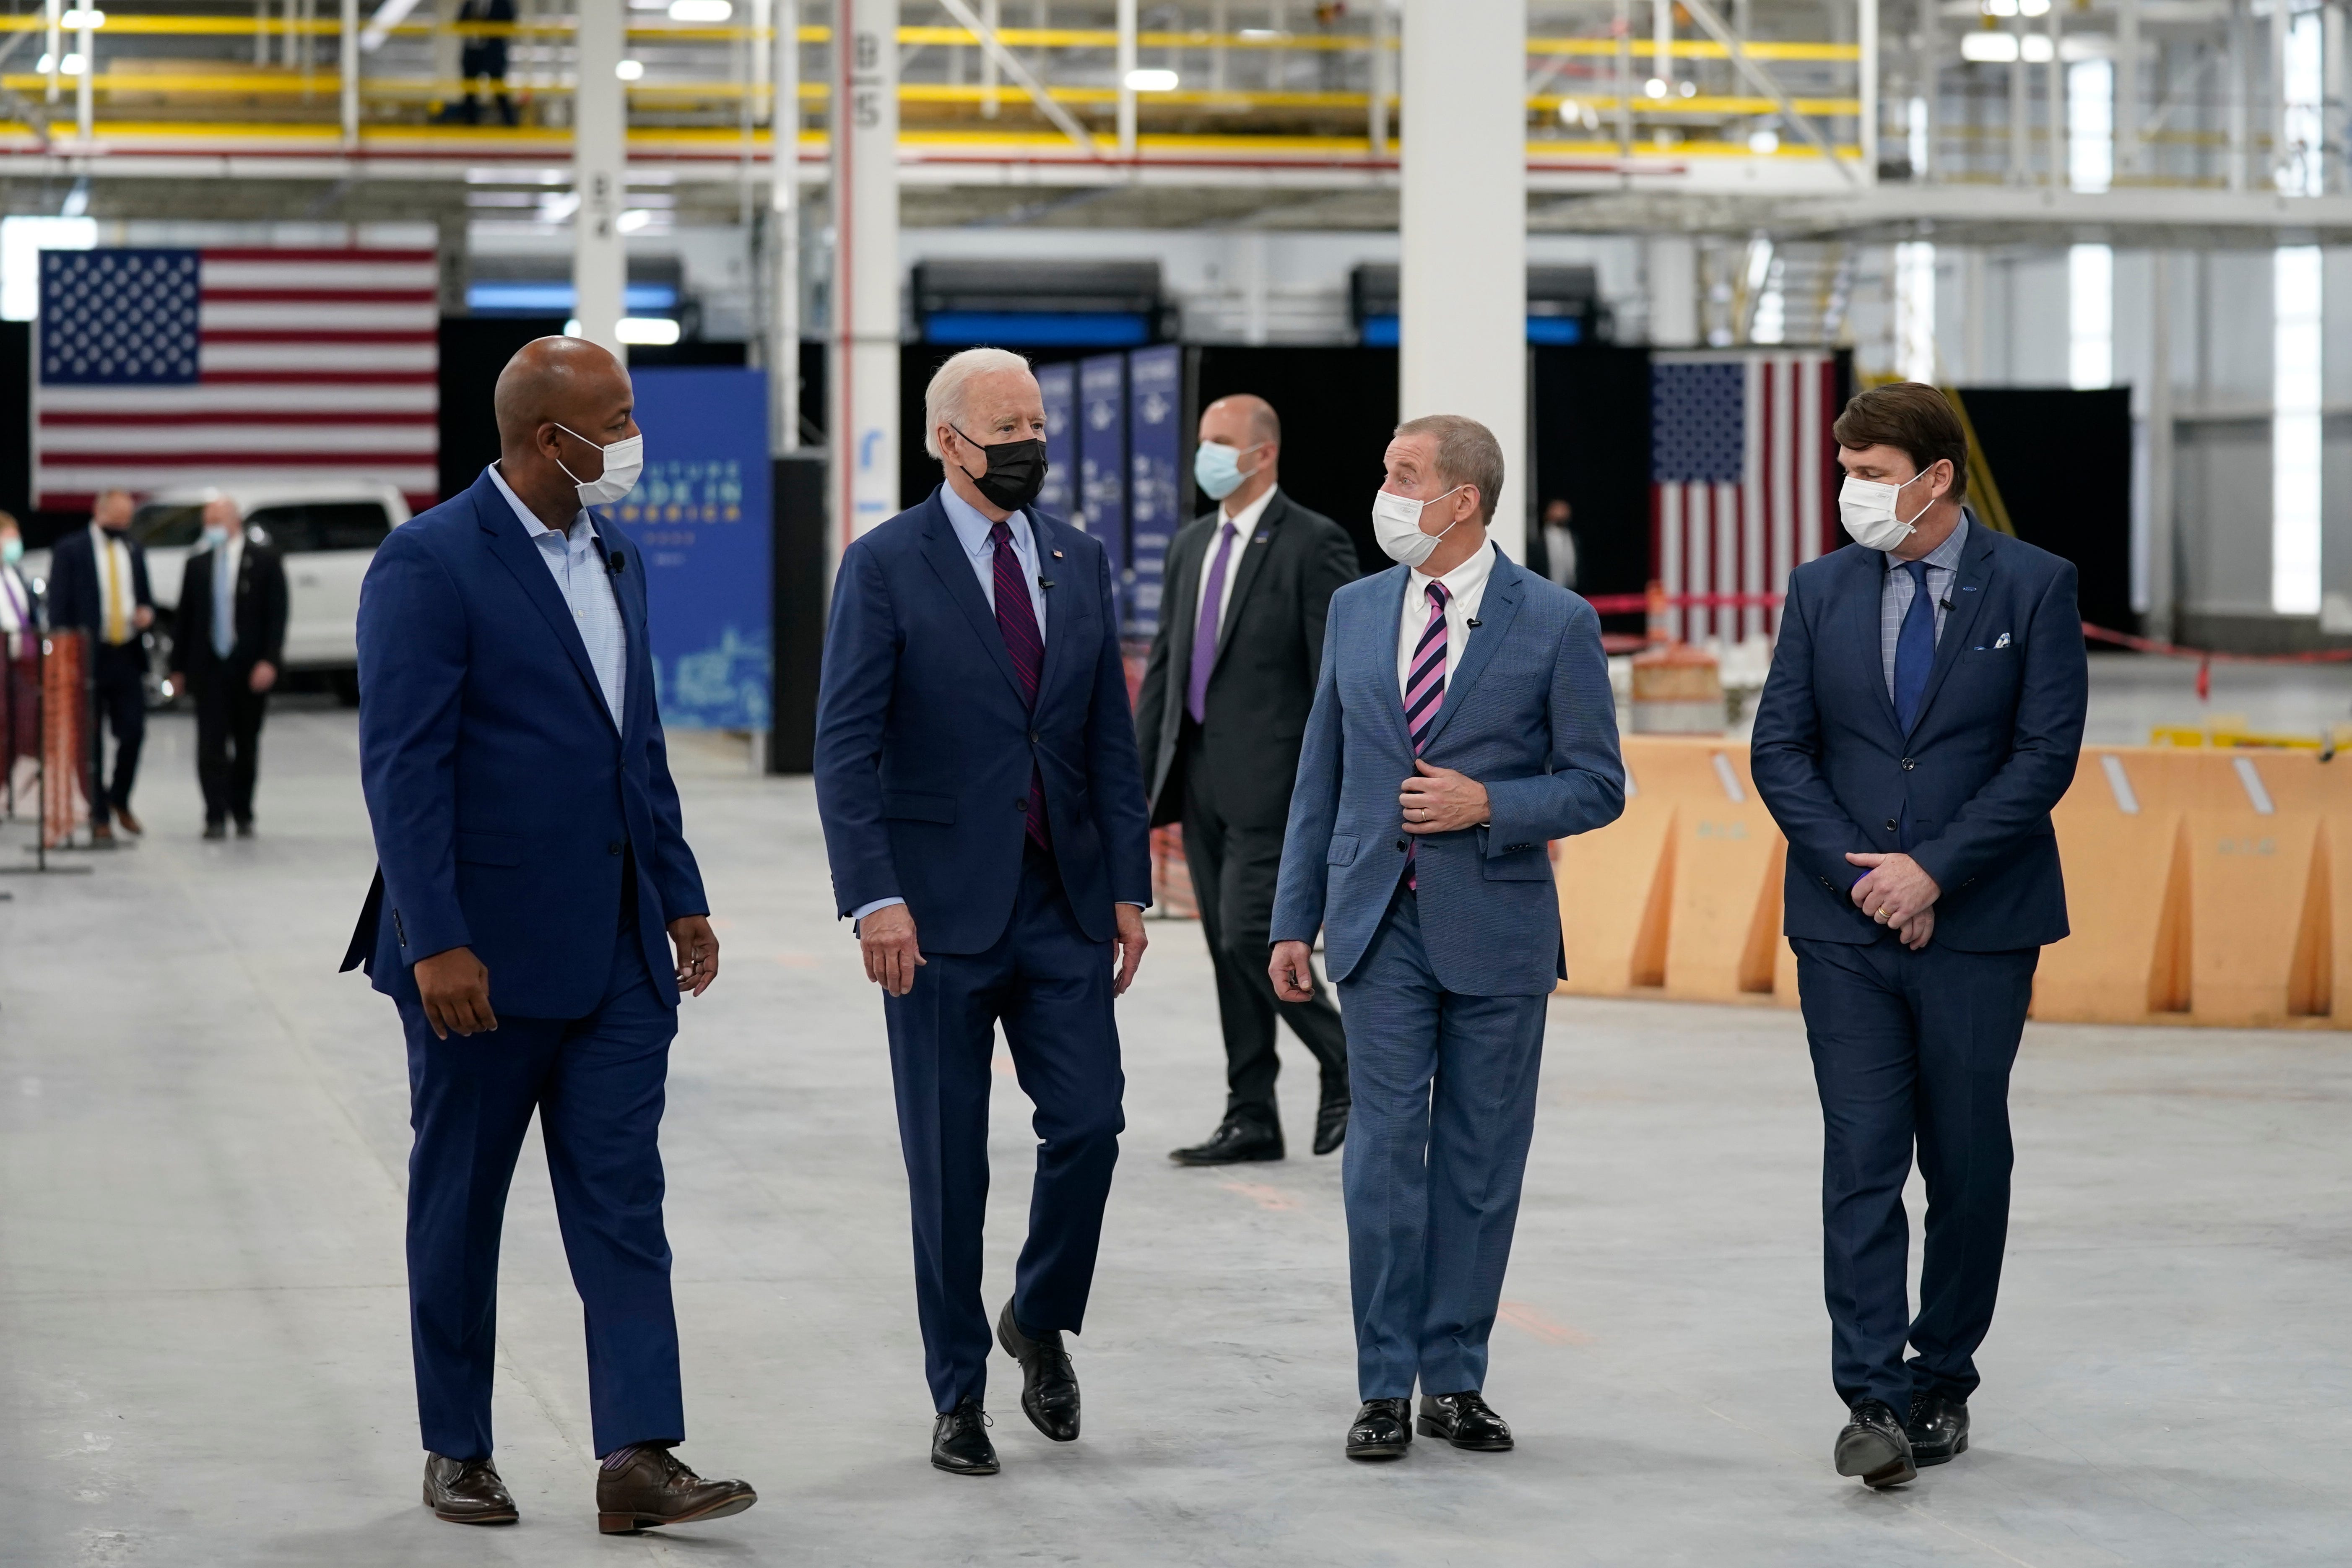 President Joe Biden tours the Ford Rouge EV Center, Tuesday, May 18, 2021, in Dearborn, Mich. From left, Corey Williams, plant manager, Biden, William Ford, Jr., Executive Chairman, Ford Motor Company and Jim Farley, CEO, Ford Motor Company.